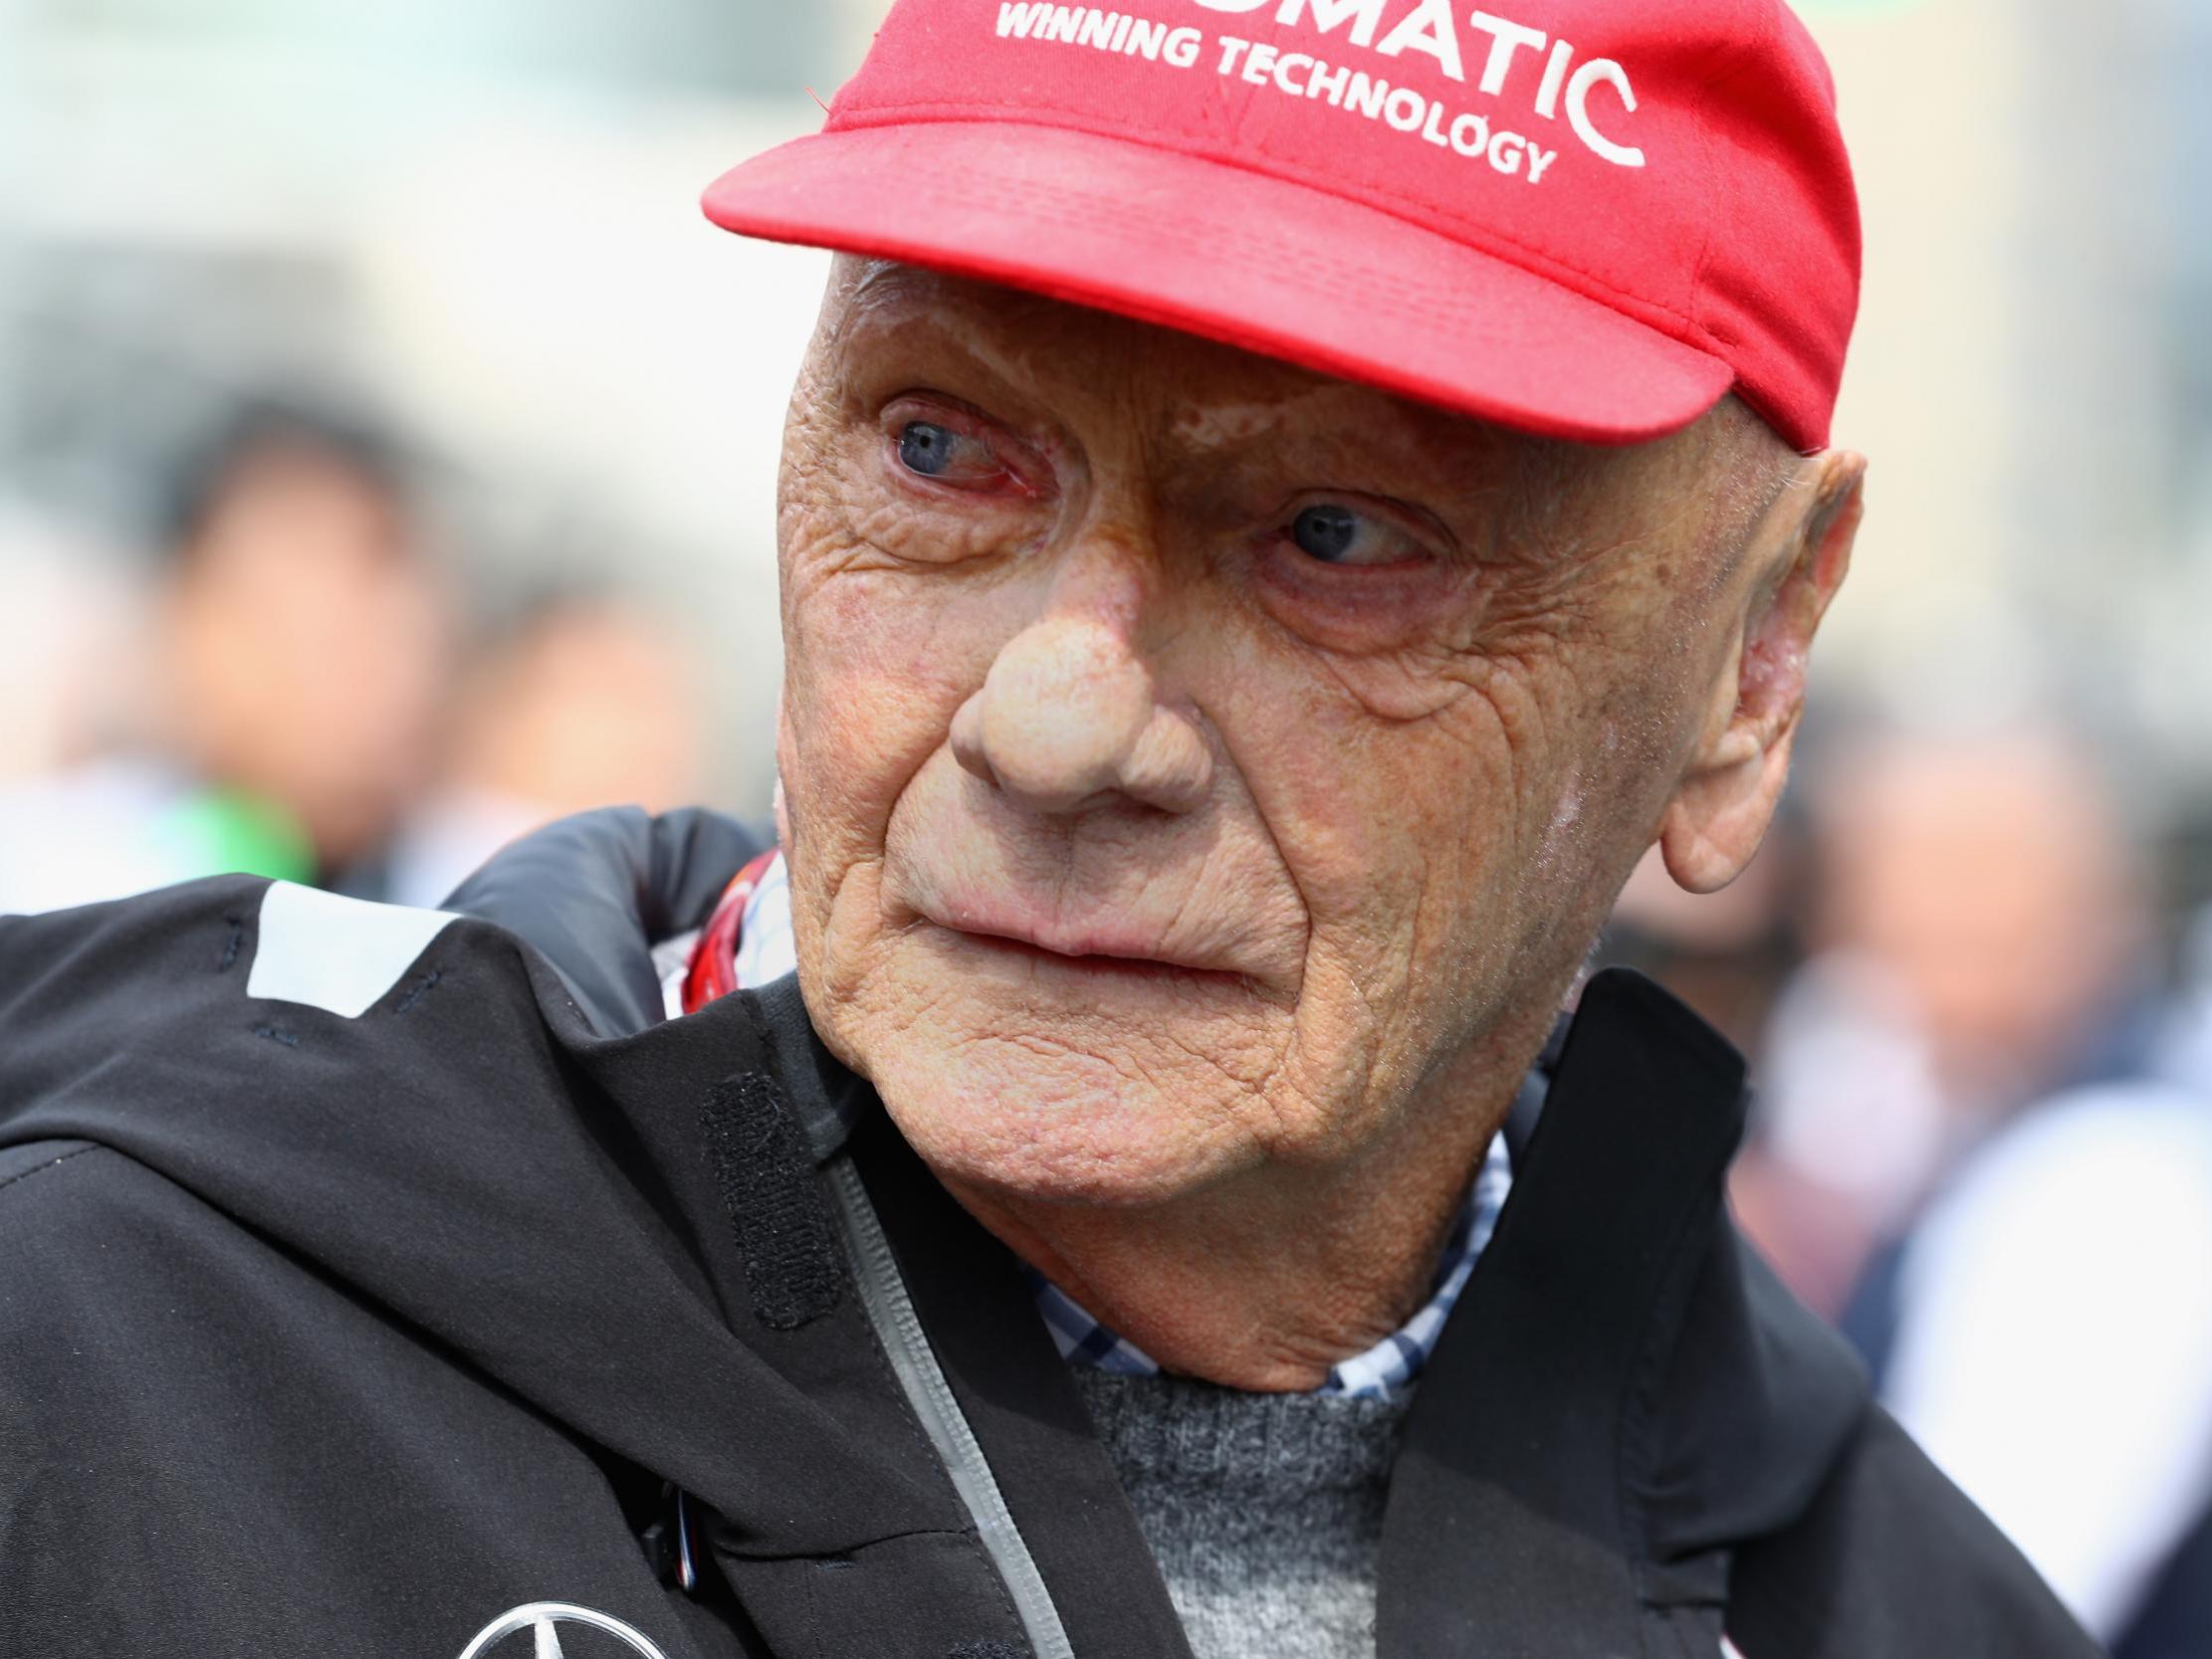 Lauda had a lung transplant five months ago